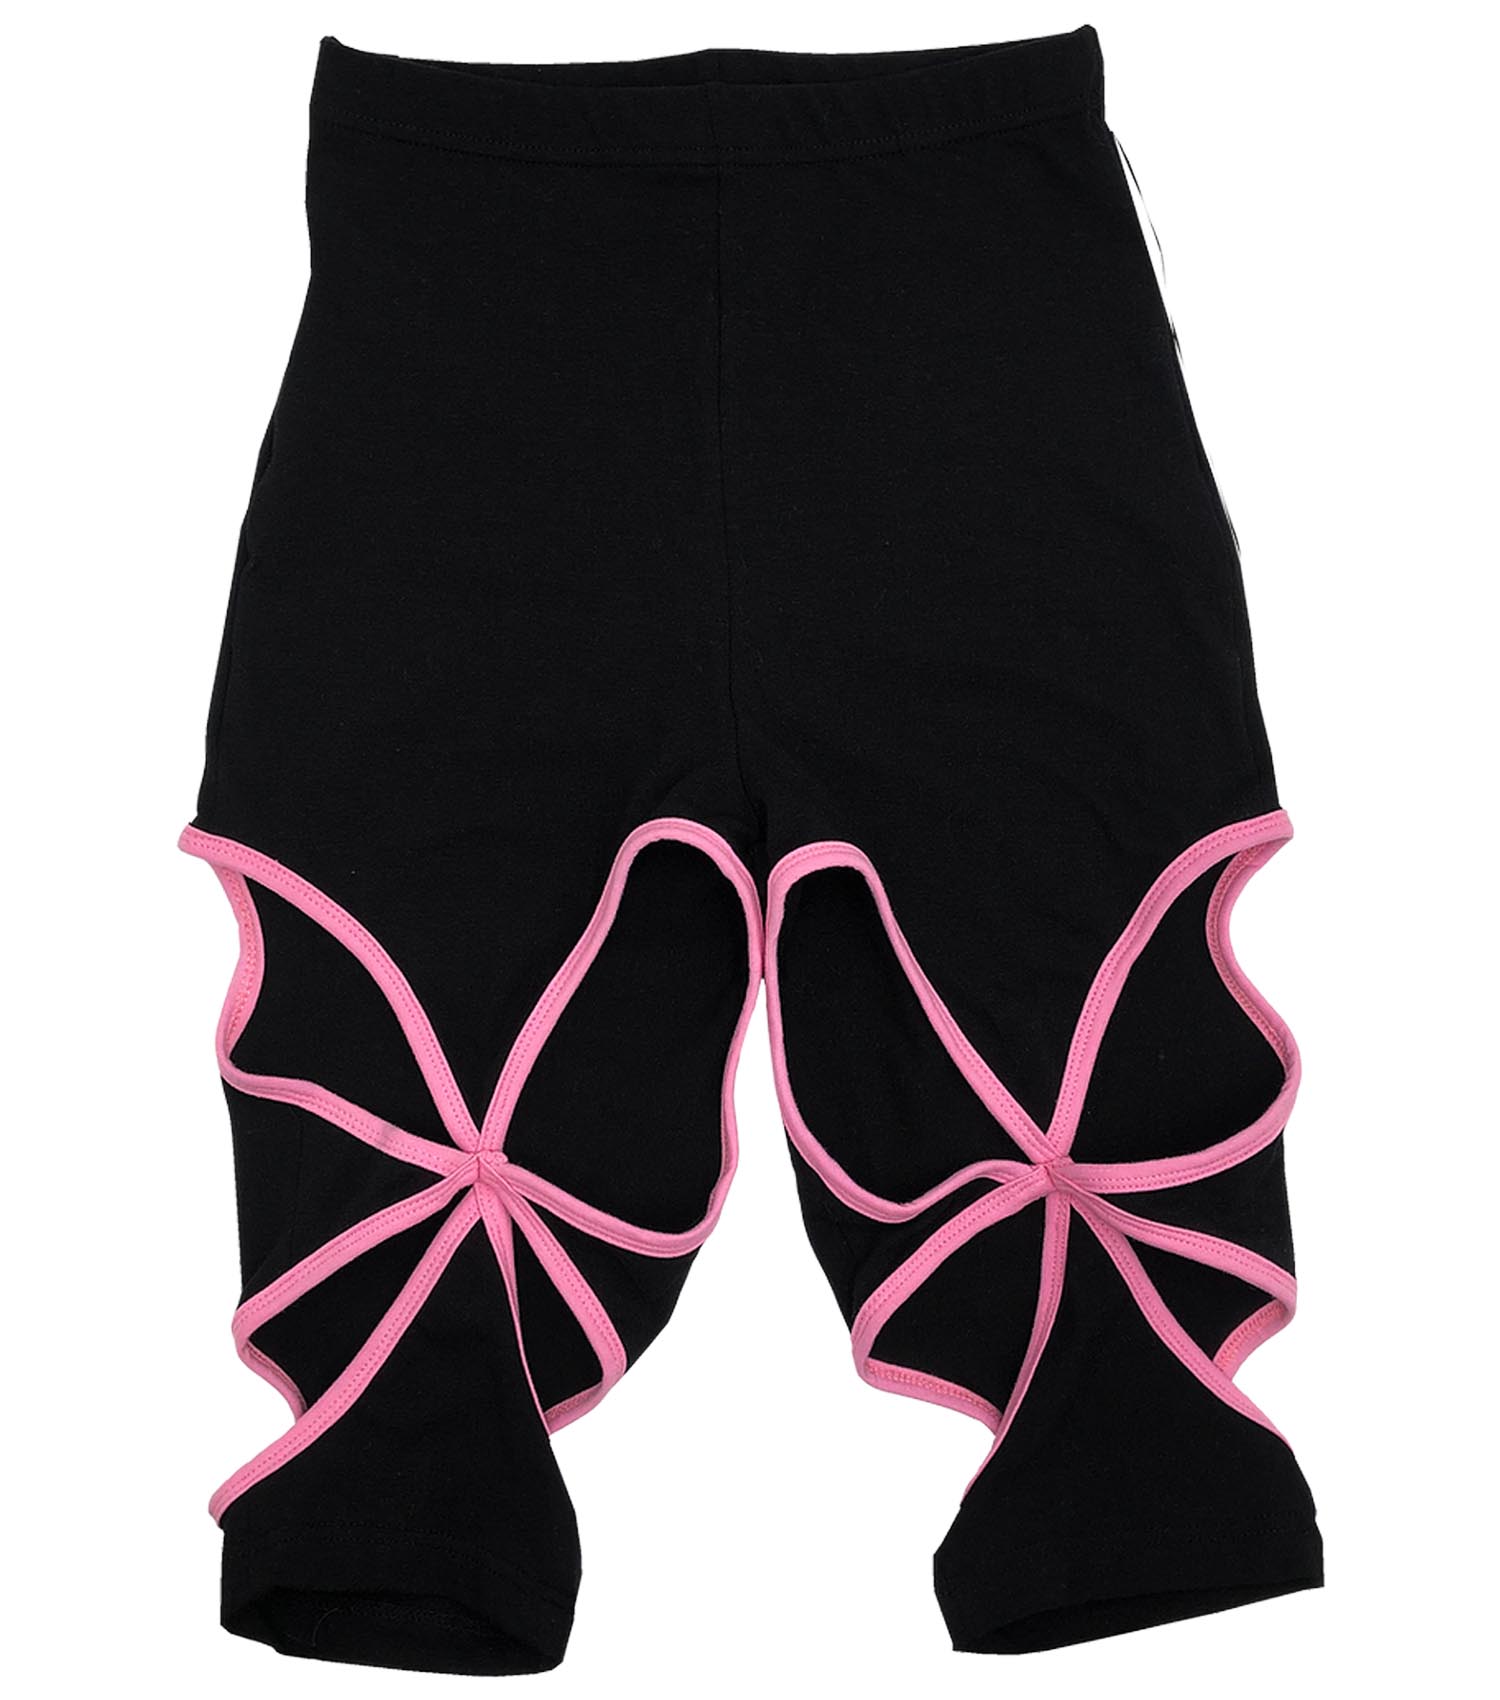 Kathleen, 3i3, handmade, los angeles, california, new, designer, hand crafted, one of a kind, small artist, artisan, made by hand, Bike shorts, cycling shorts, shorts, butterfly, bicycle shorts, butterfly shorts, activewear, high waisted, cotton, stretch, comfort, shop kathleen, butterfly cutout